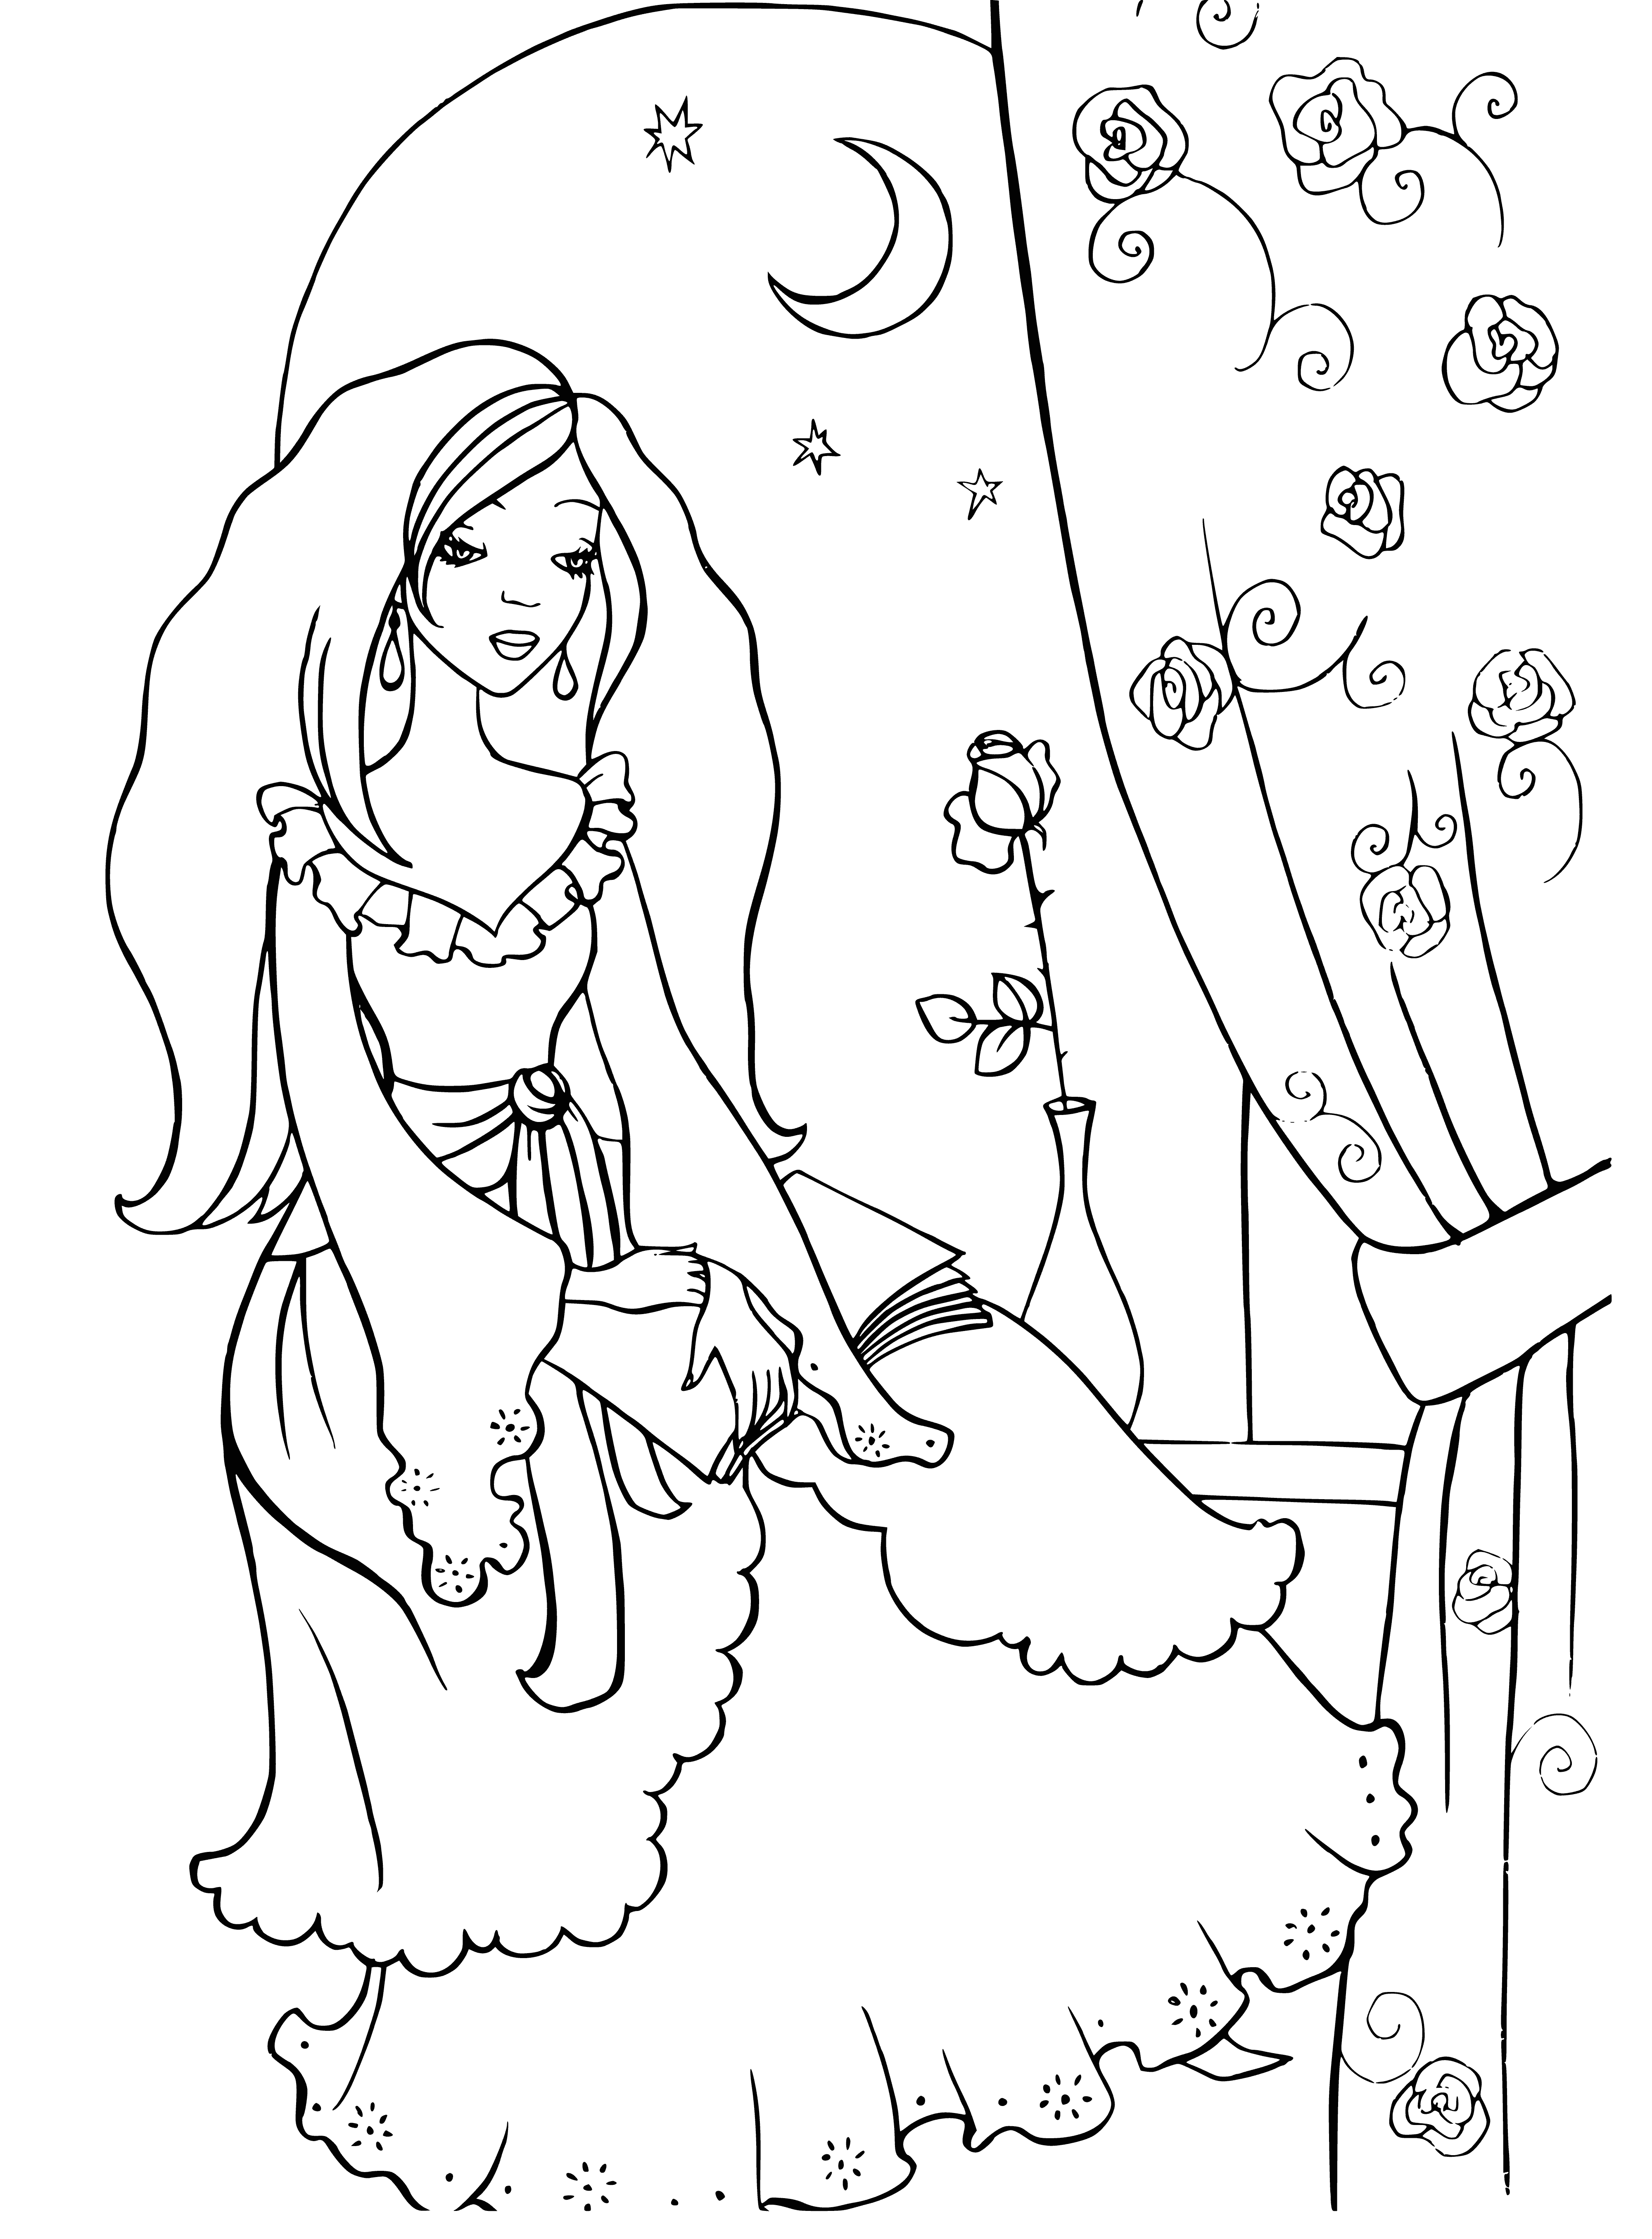 coloring page: Fairy kingdom is peaceful & beautiful with fragrant flowers, tall trees & warm air; fairy folk tend gardens & prepare for night.